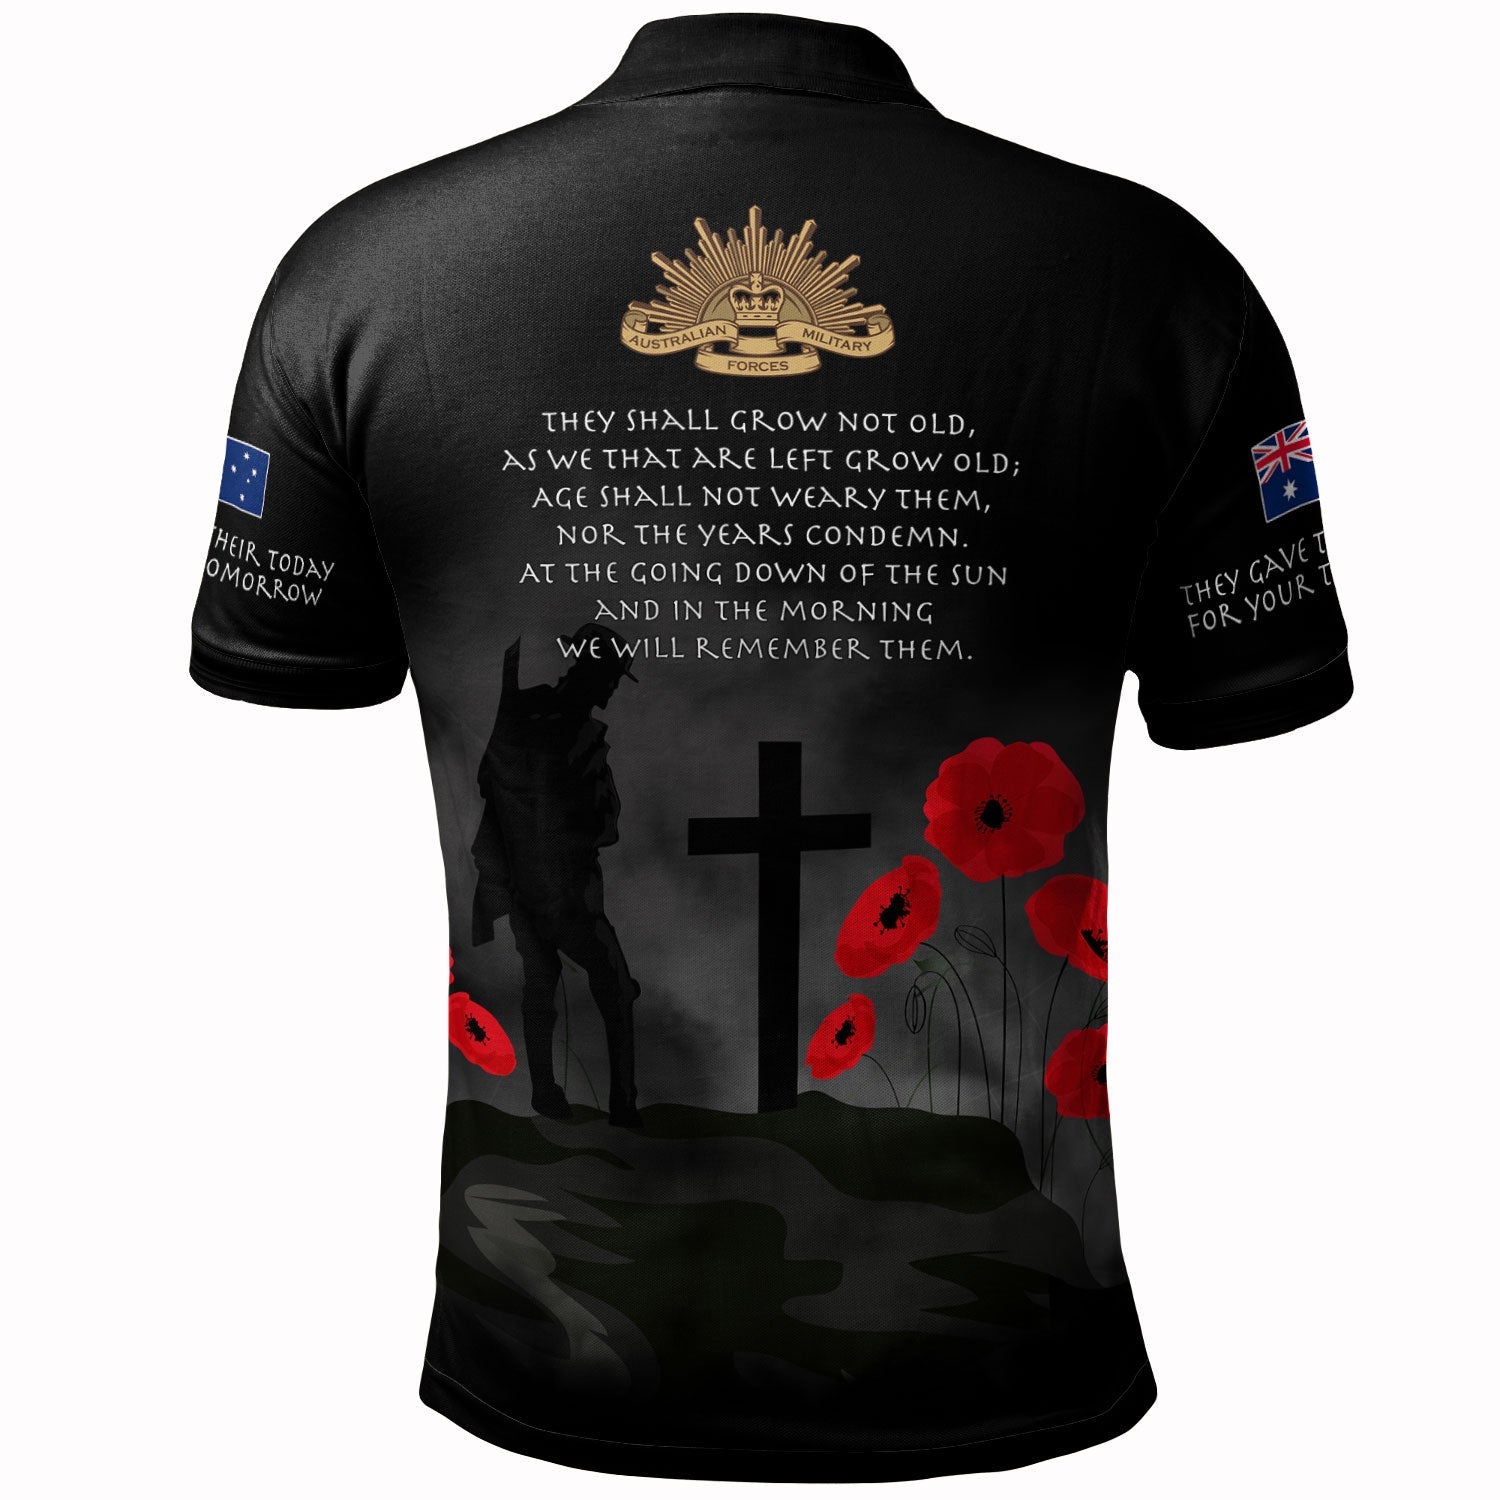 Australia Anzac Day Polo Shirt - For the Fallen Lest We Forget Polo Shirt